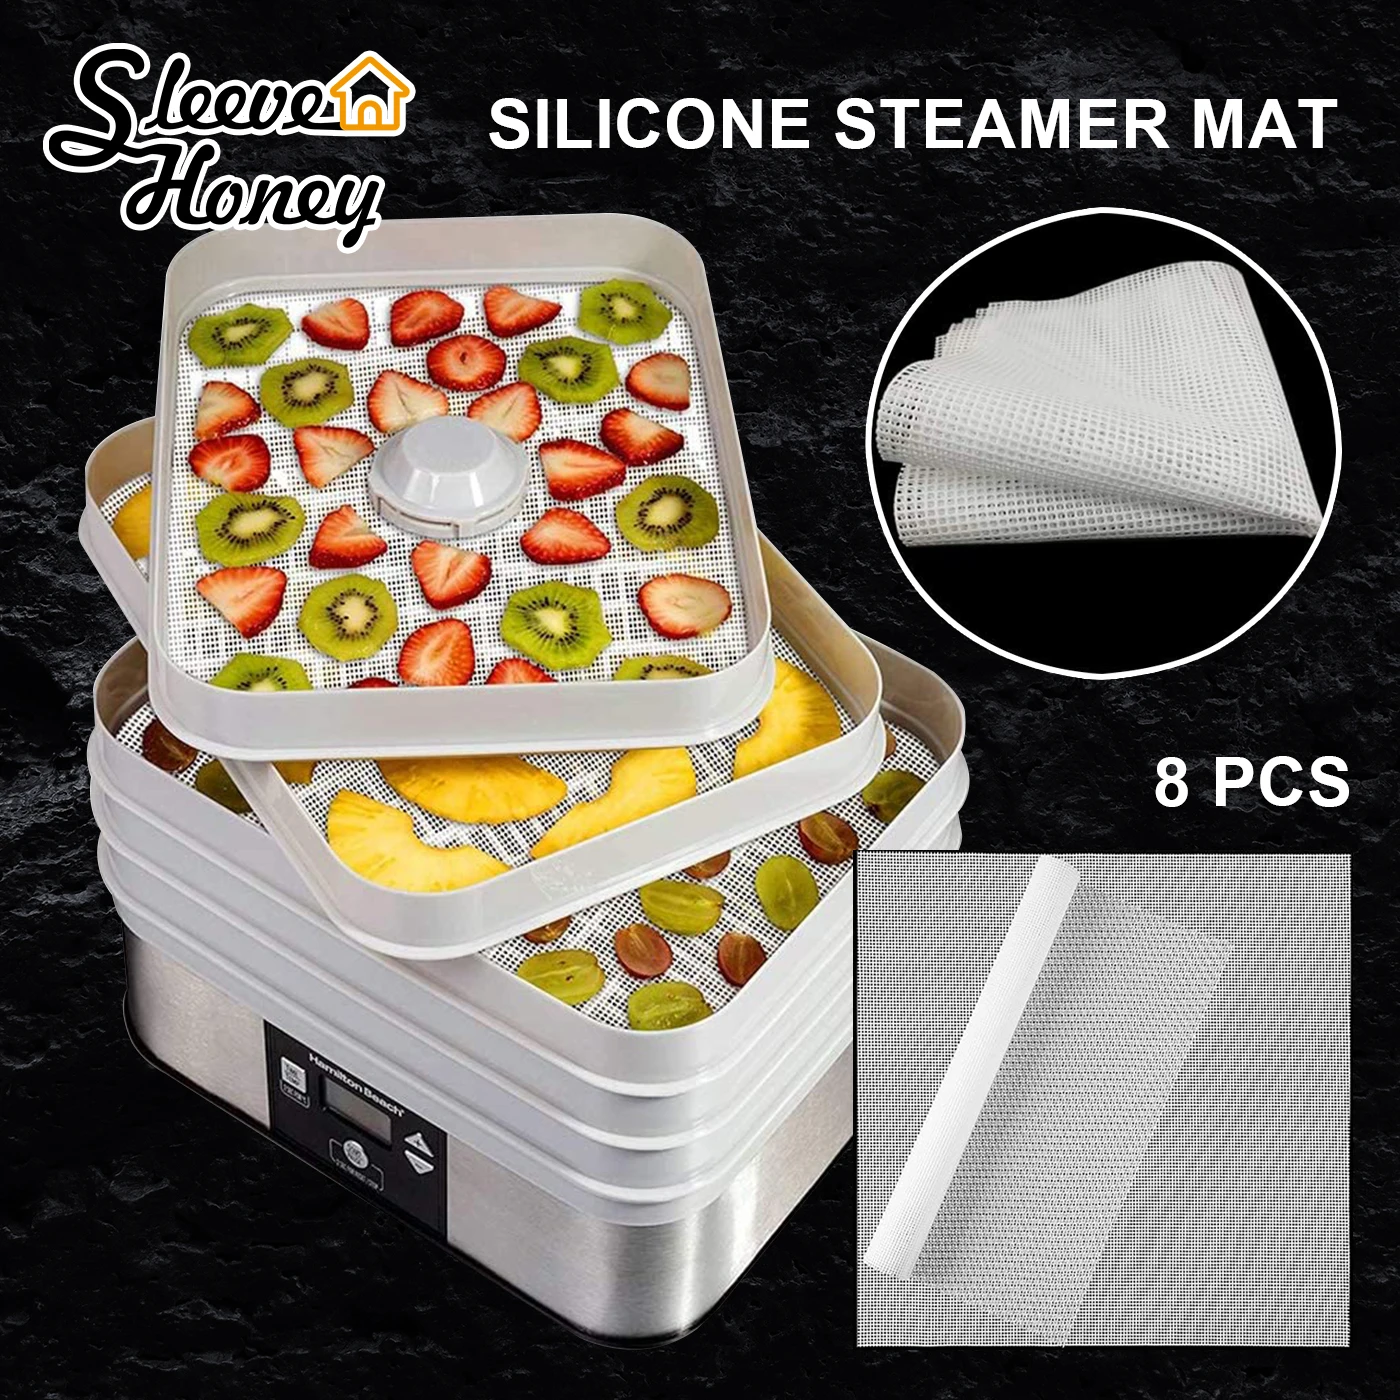 https://ae01.alicdn.com/kf/H13a8242ee7114c11b4c4ed7271509884R/8Pcs-Square-Silicone-Steamer-Mats-Mesh-Dry-Fruit-Pad-Non-stick-Biscuit-Cake-Cookies-Dumpling-Dehydrator.jpg